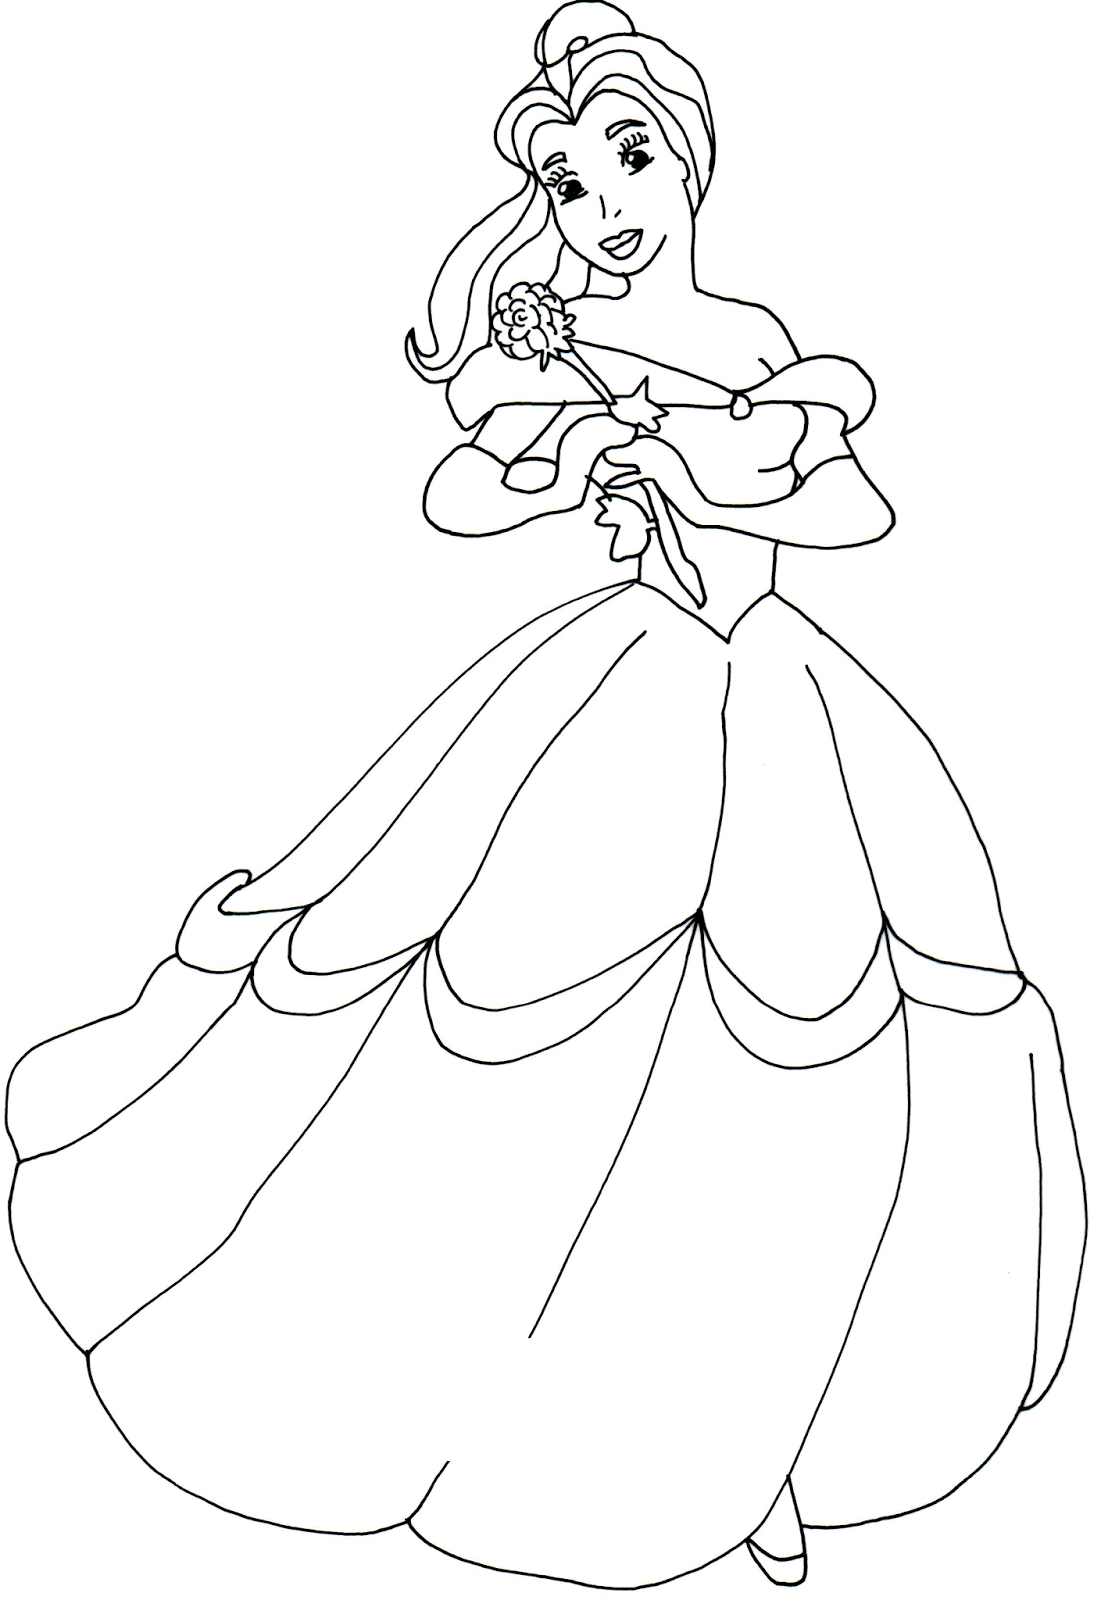 Princess Belle Coloring Page - Coloring Home